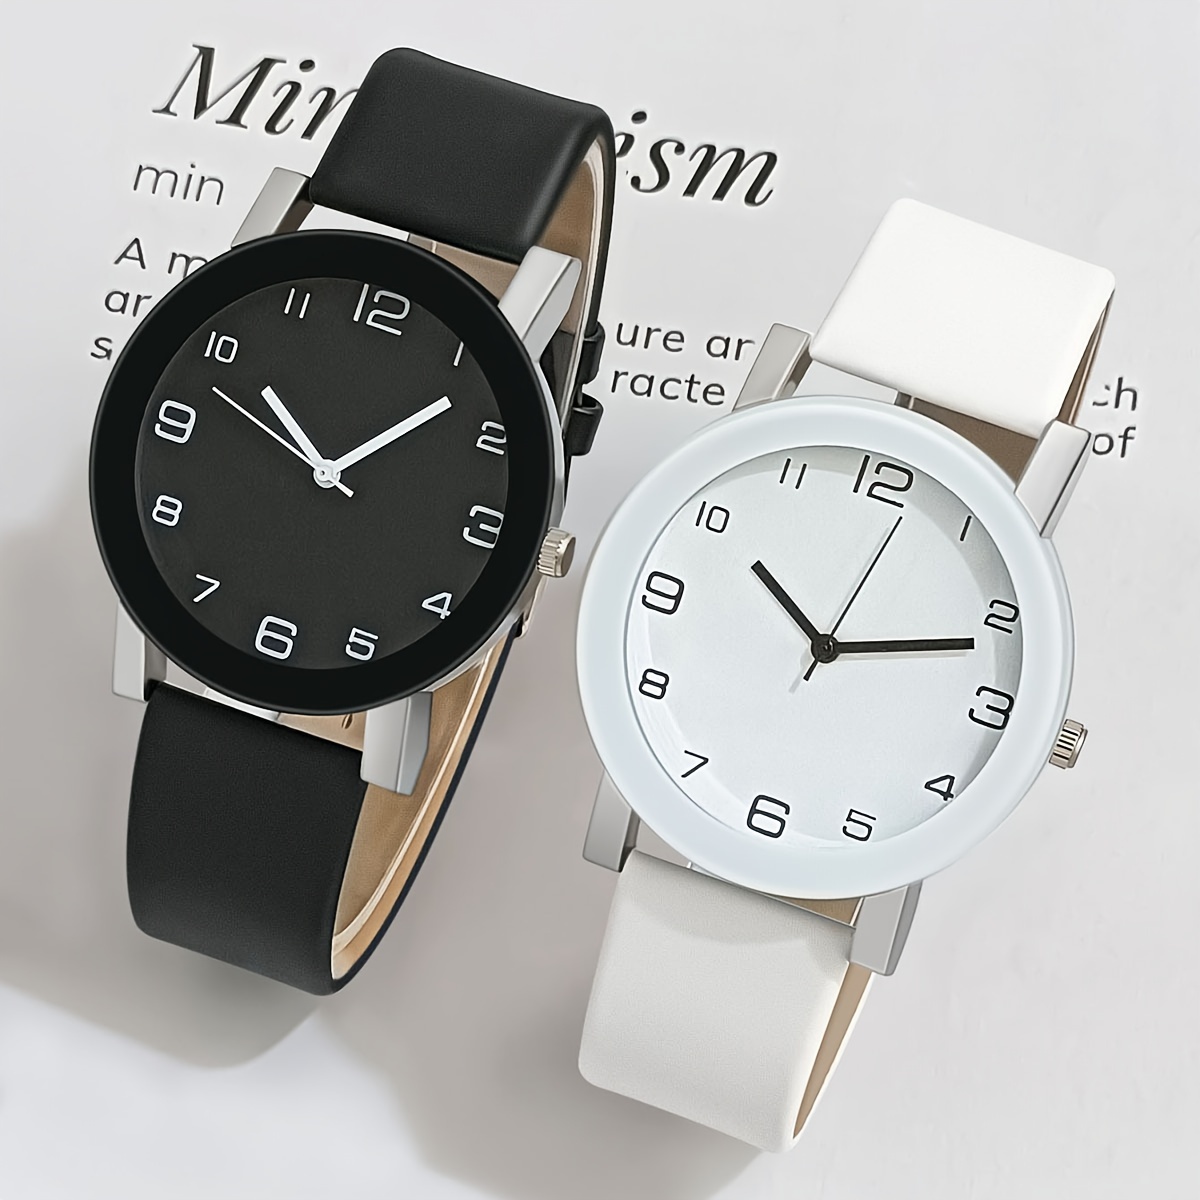 

Casual Round Pointer Quartz Watch Analog Pu Leather Wrist Watch Couples Watch Valentines Gift For Her Him